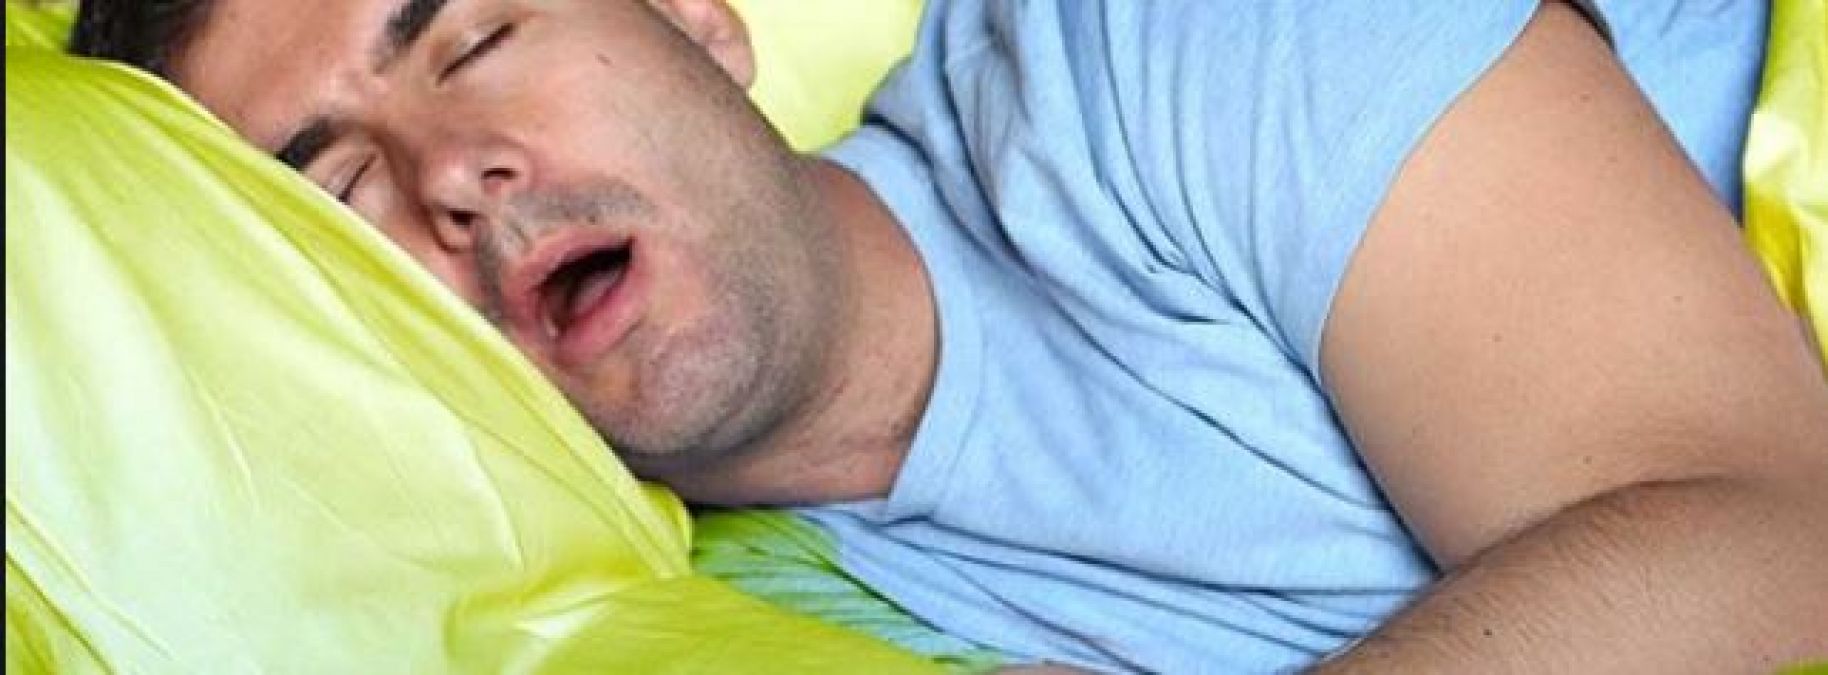 If you are troubled by saliva falling from mouth while sleeping, then follow these home remedies